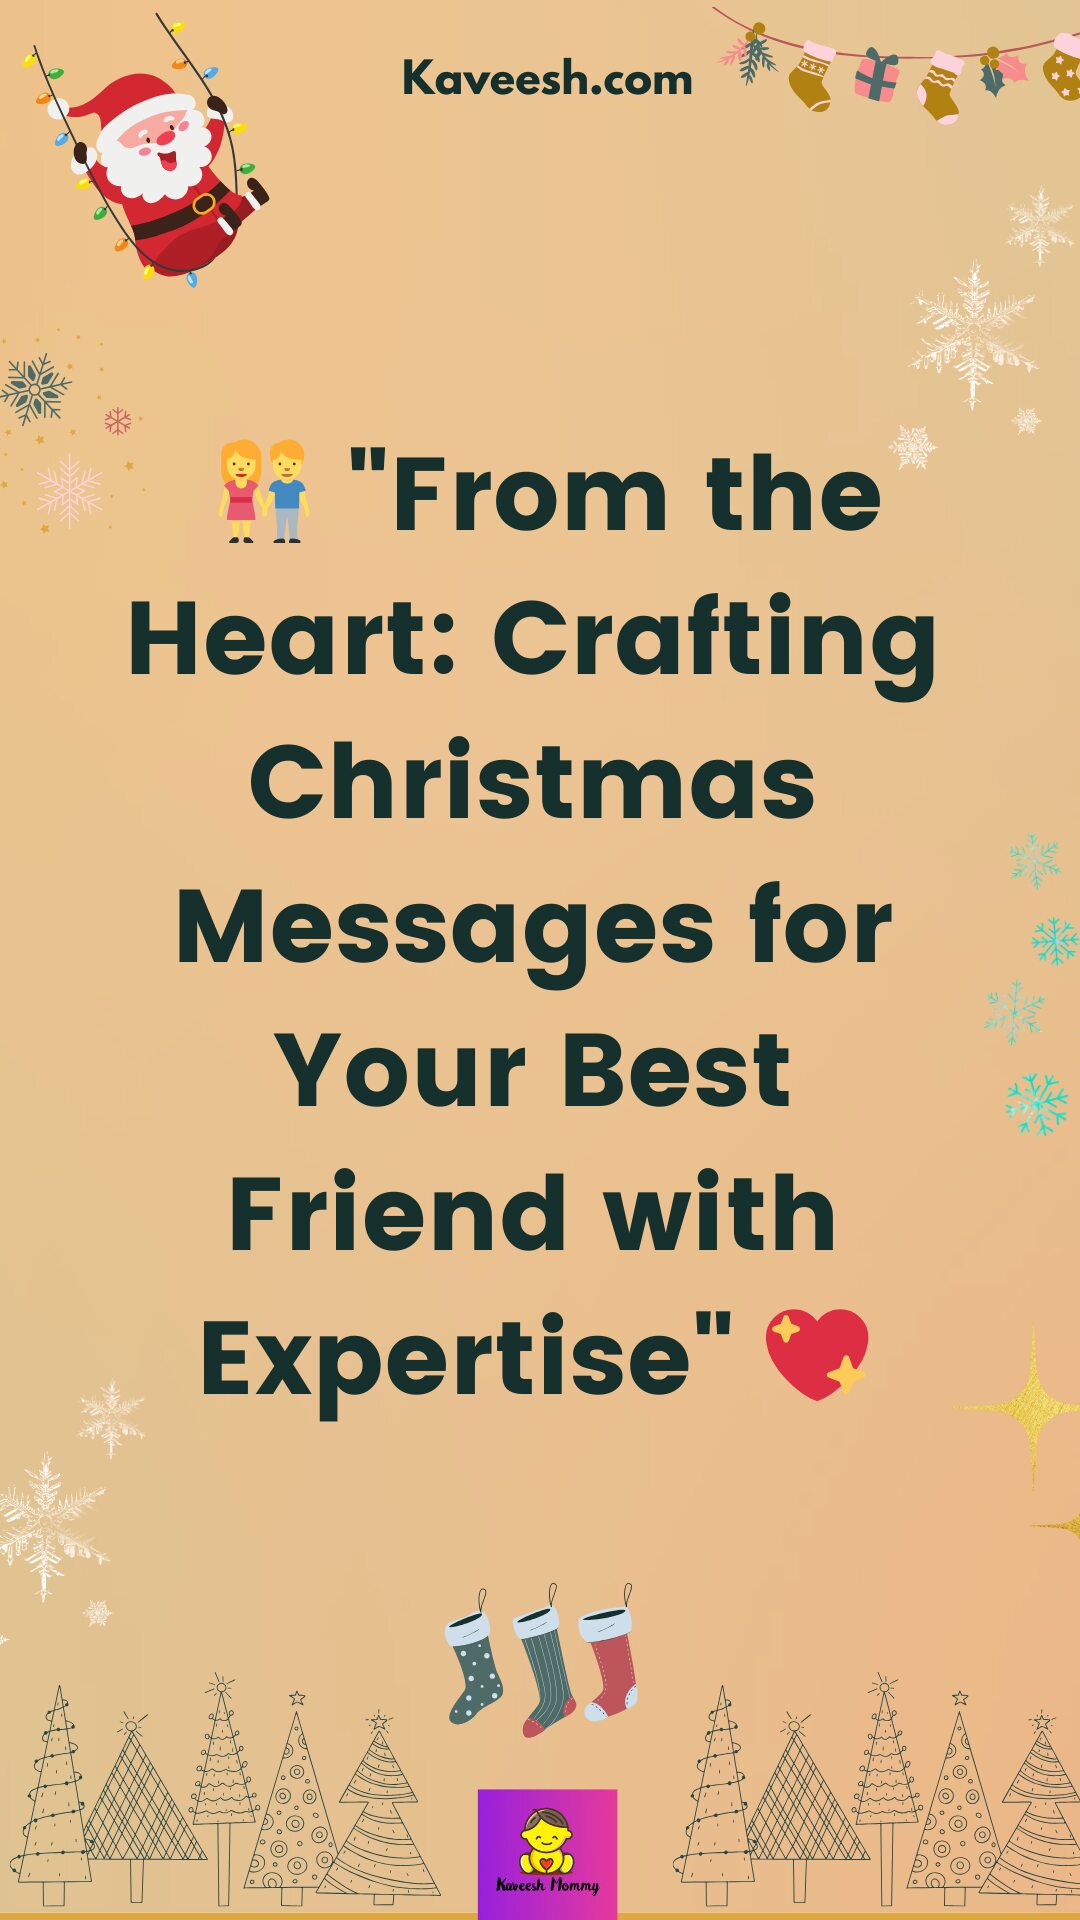 List of Christmas messages for Best Friend